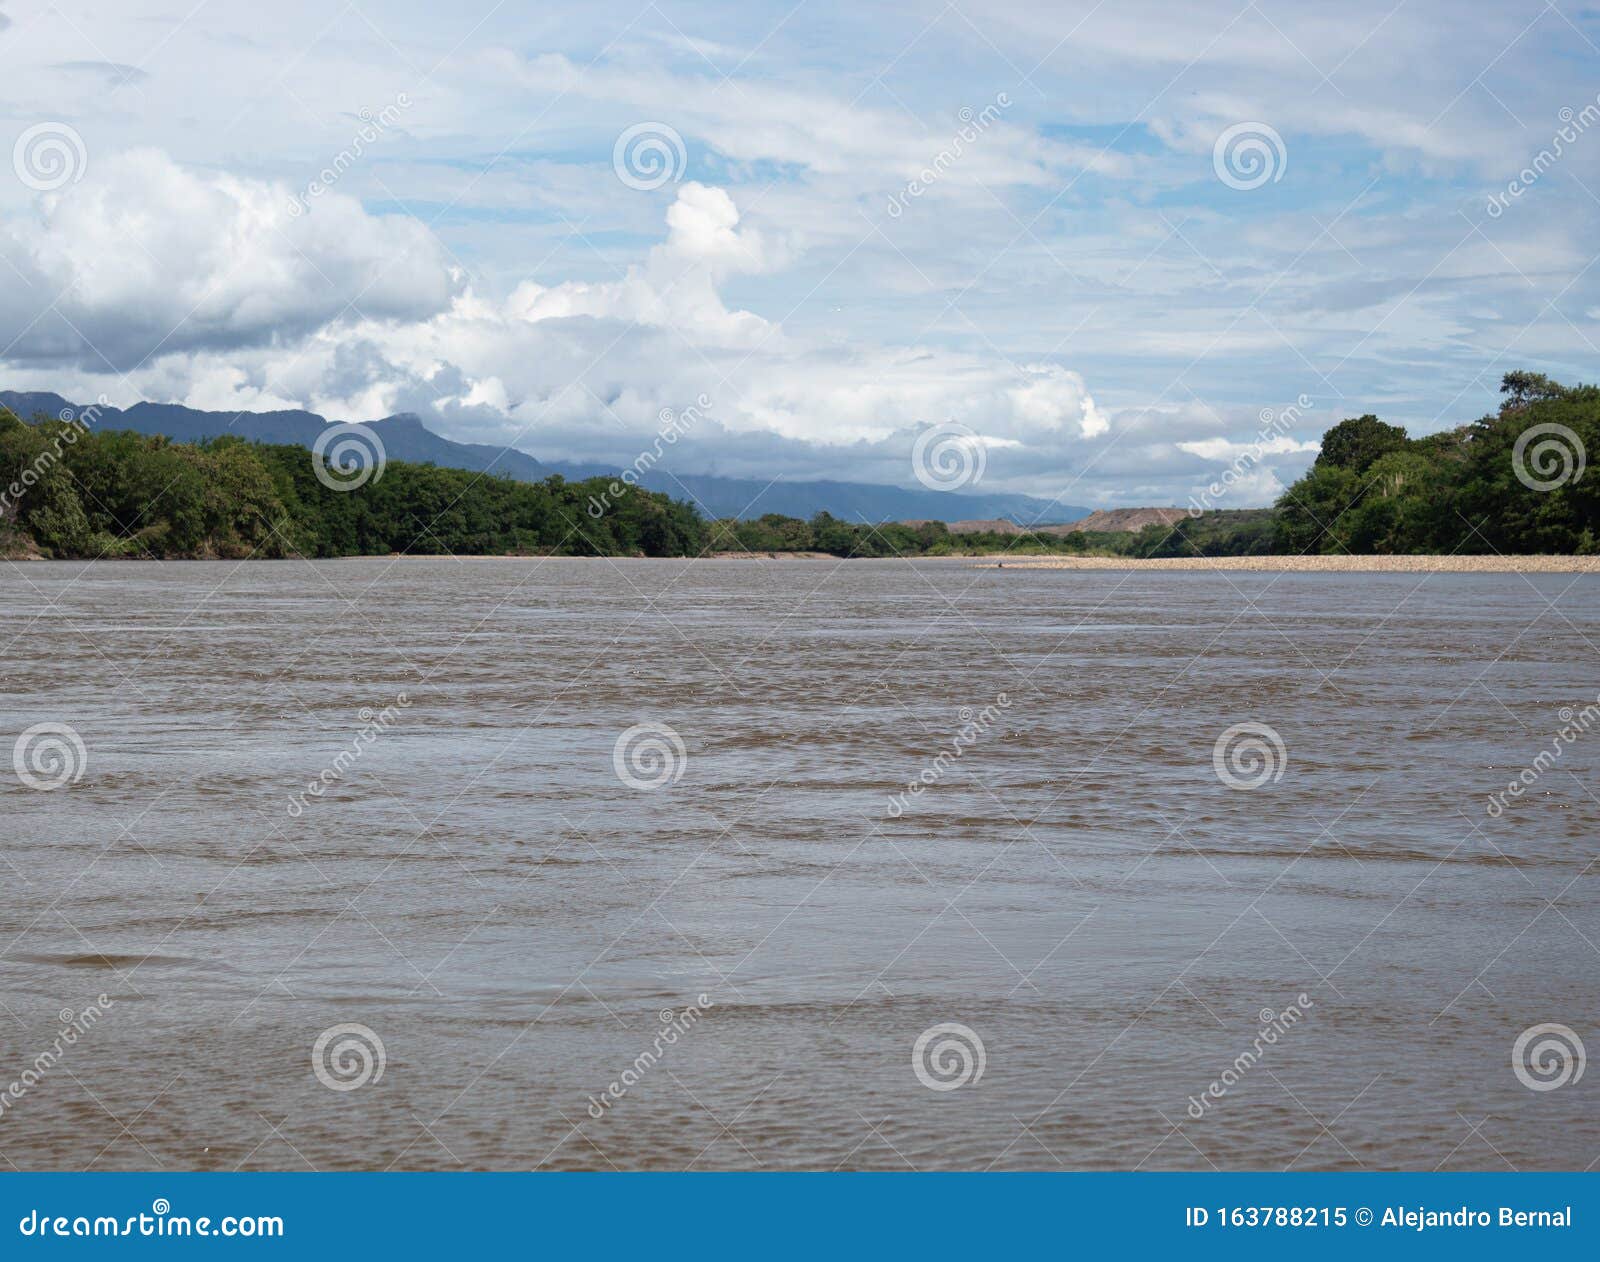 magdalena river in aipe, huila, colombia